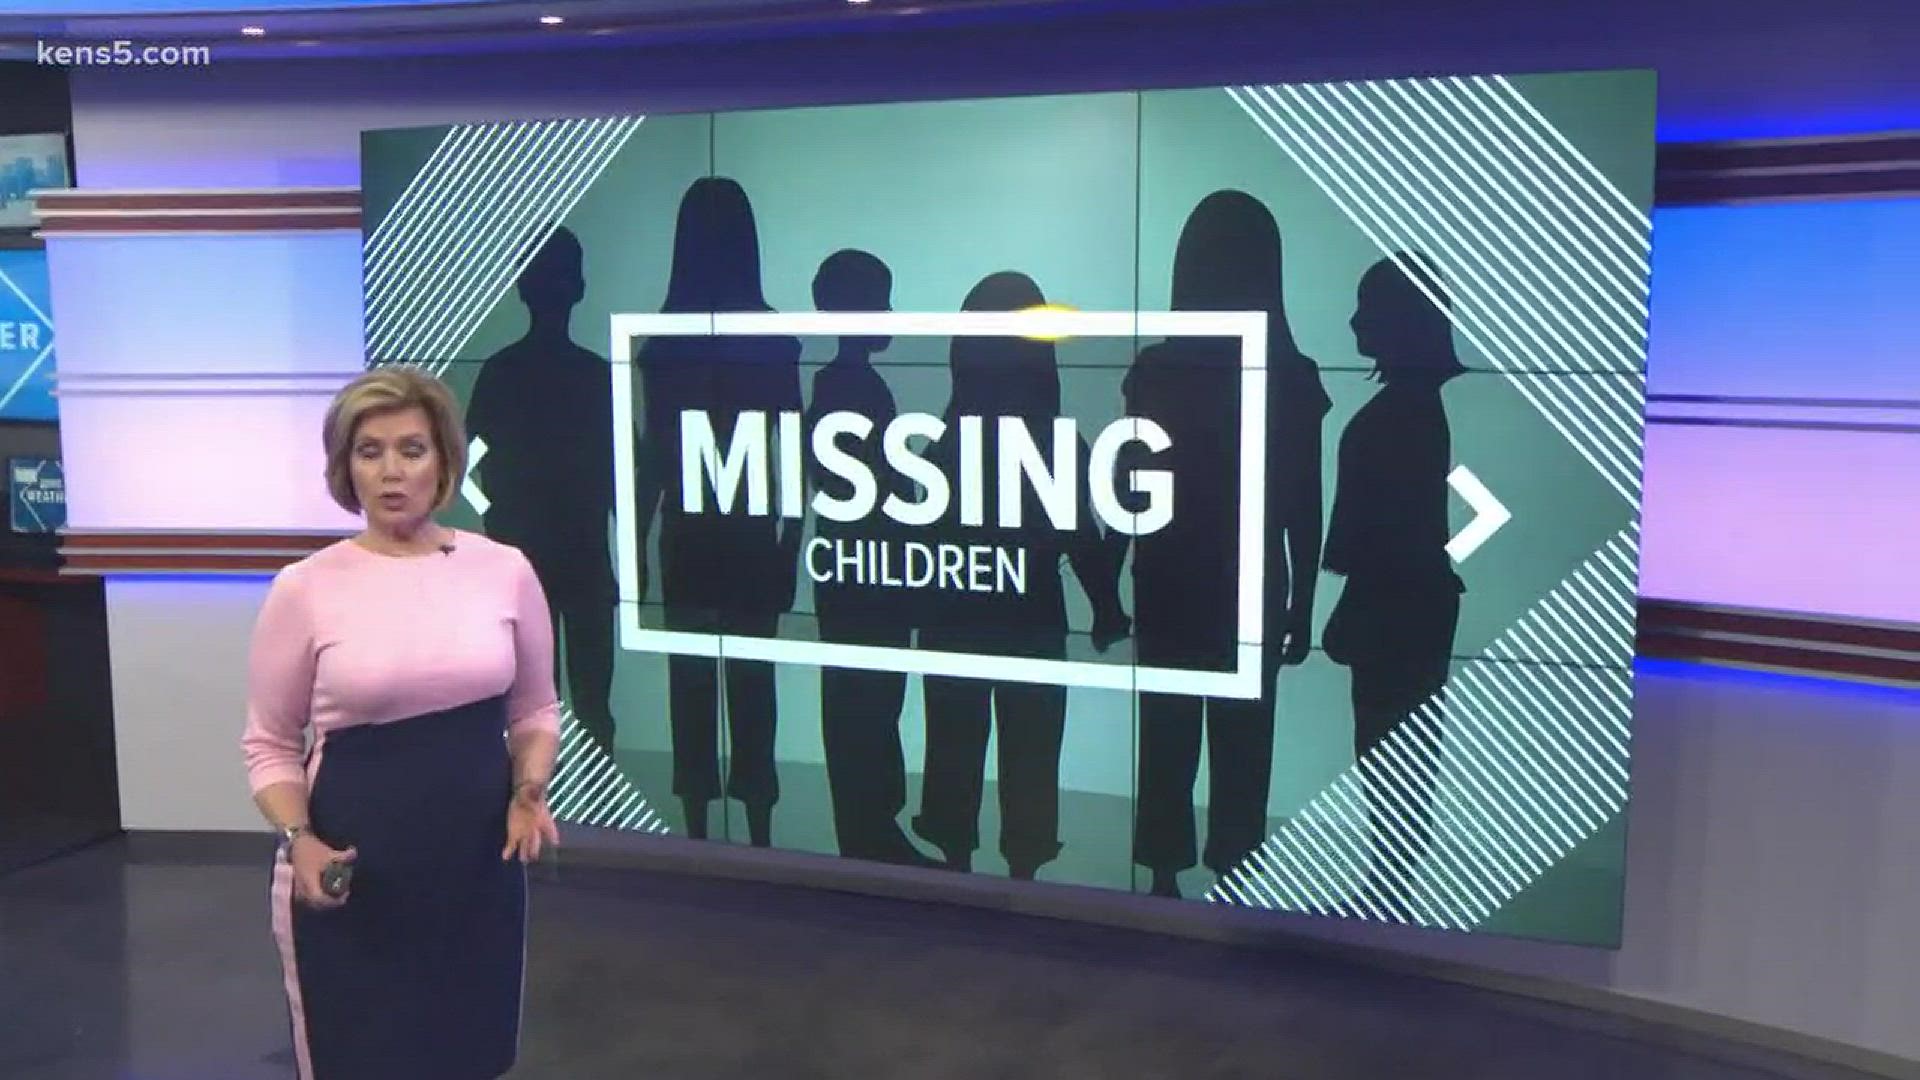 1,500 immigrant children gone missing after being separated from their parents at the border by the government... it's a claim being made by people on social media. Eyewitness News border reporter Oscar Margain verifies.